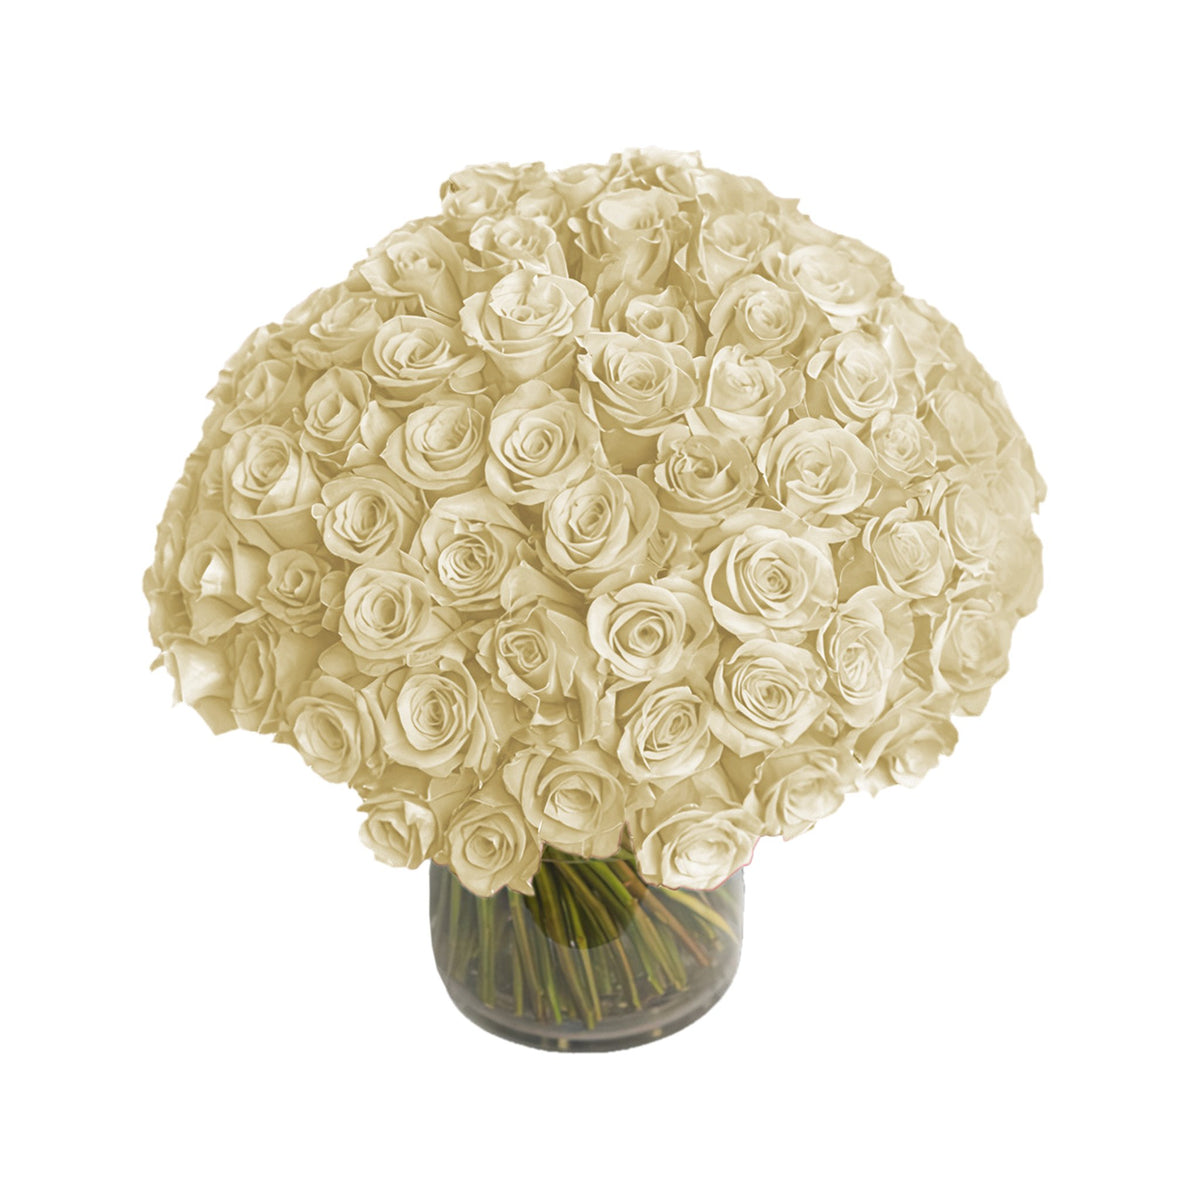 NYC Flower Delivery - Fresh Roses in a Crystal Vase | White - 100 Roses - Roses